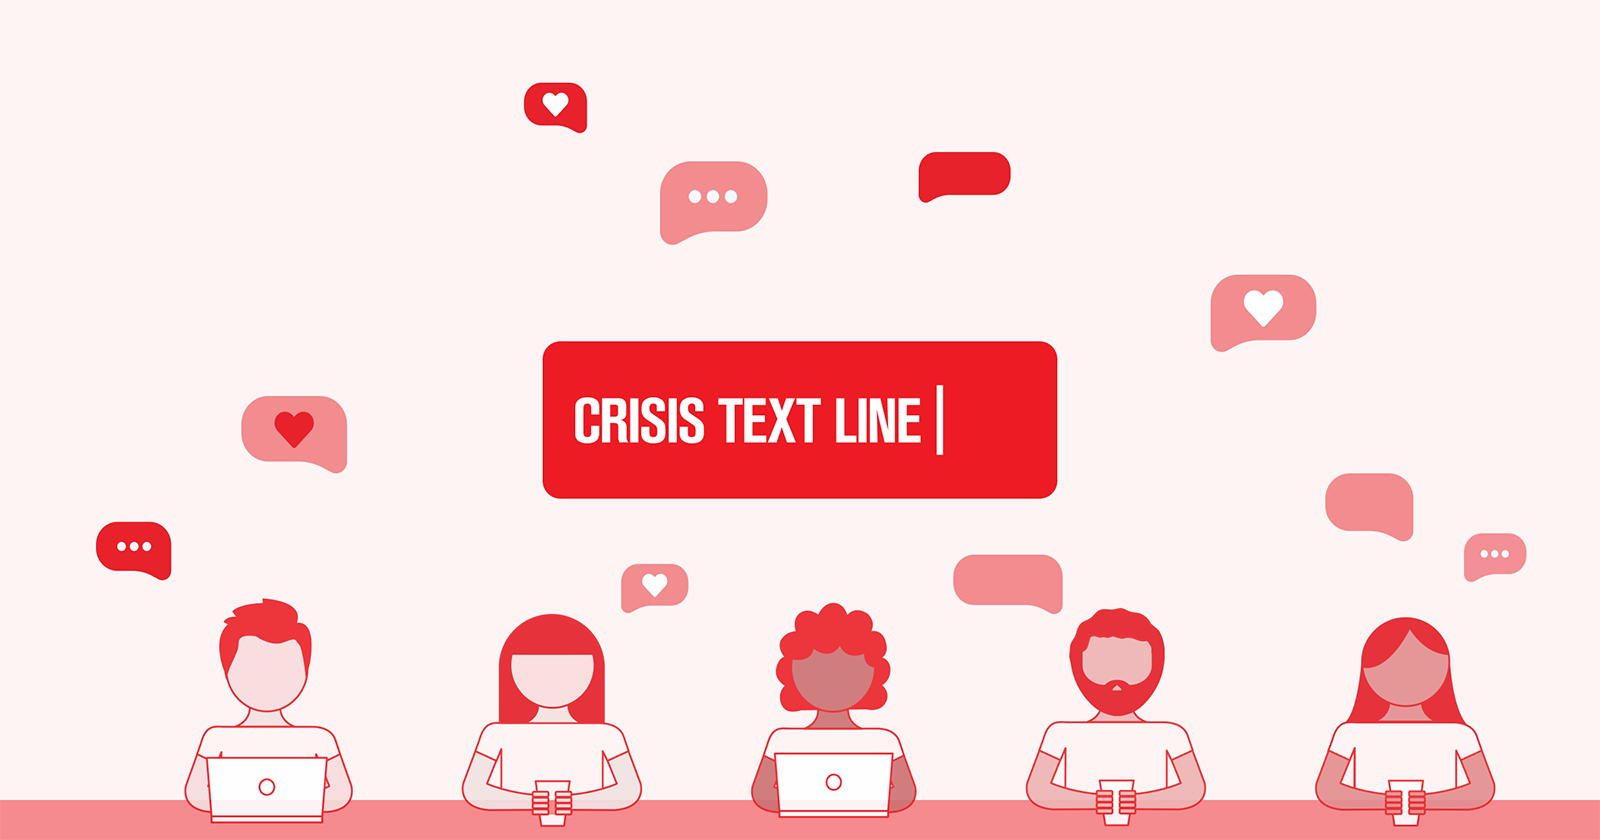 Crisis Text Line | Text HOME To 741741 free, 24/7 Crisis Counseling